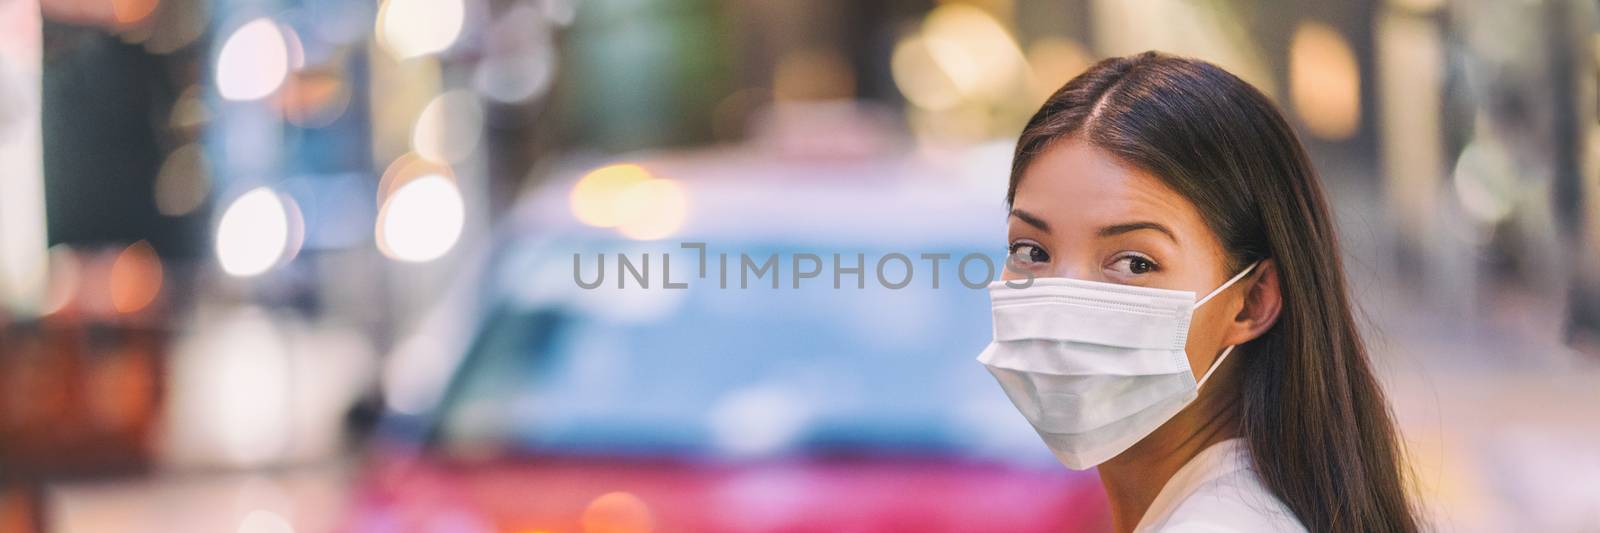 Flu virus protection mask protective against influenza sickness viruses and disease. Sick sian woman wearing surgical face mask in public spaces. Healthcare banner panorama concept.